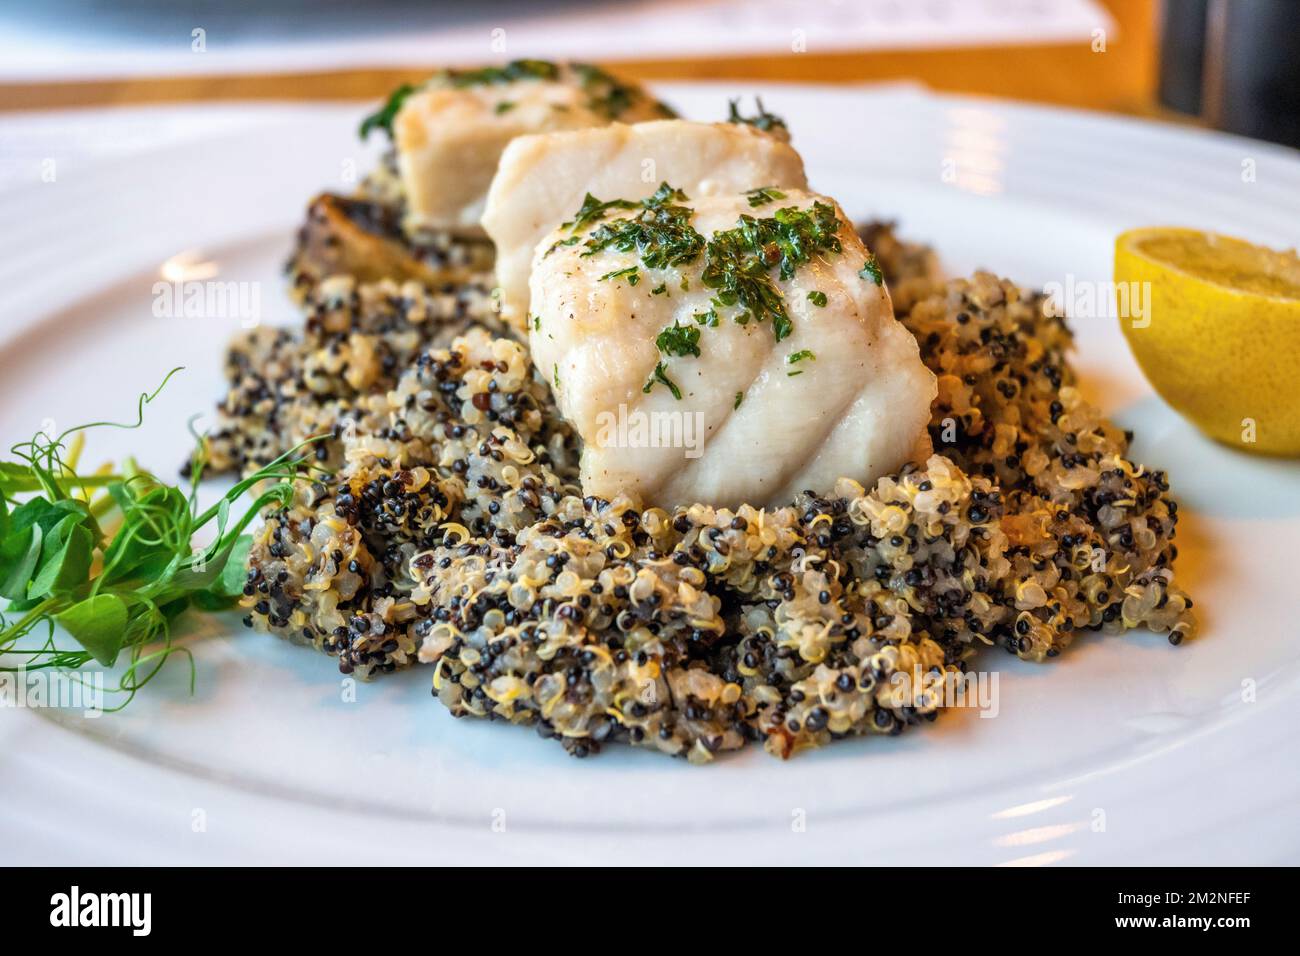 Baked sturgeon on quinoa with champignon mushroom, pea sprout and lemon on white plate, closeup. Stock Photo